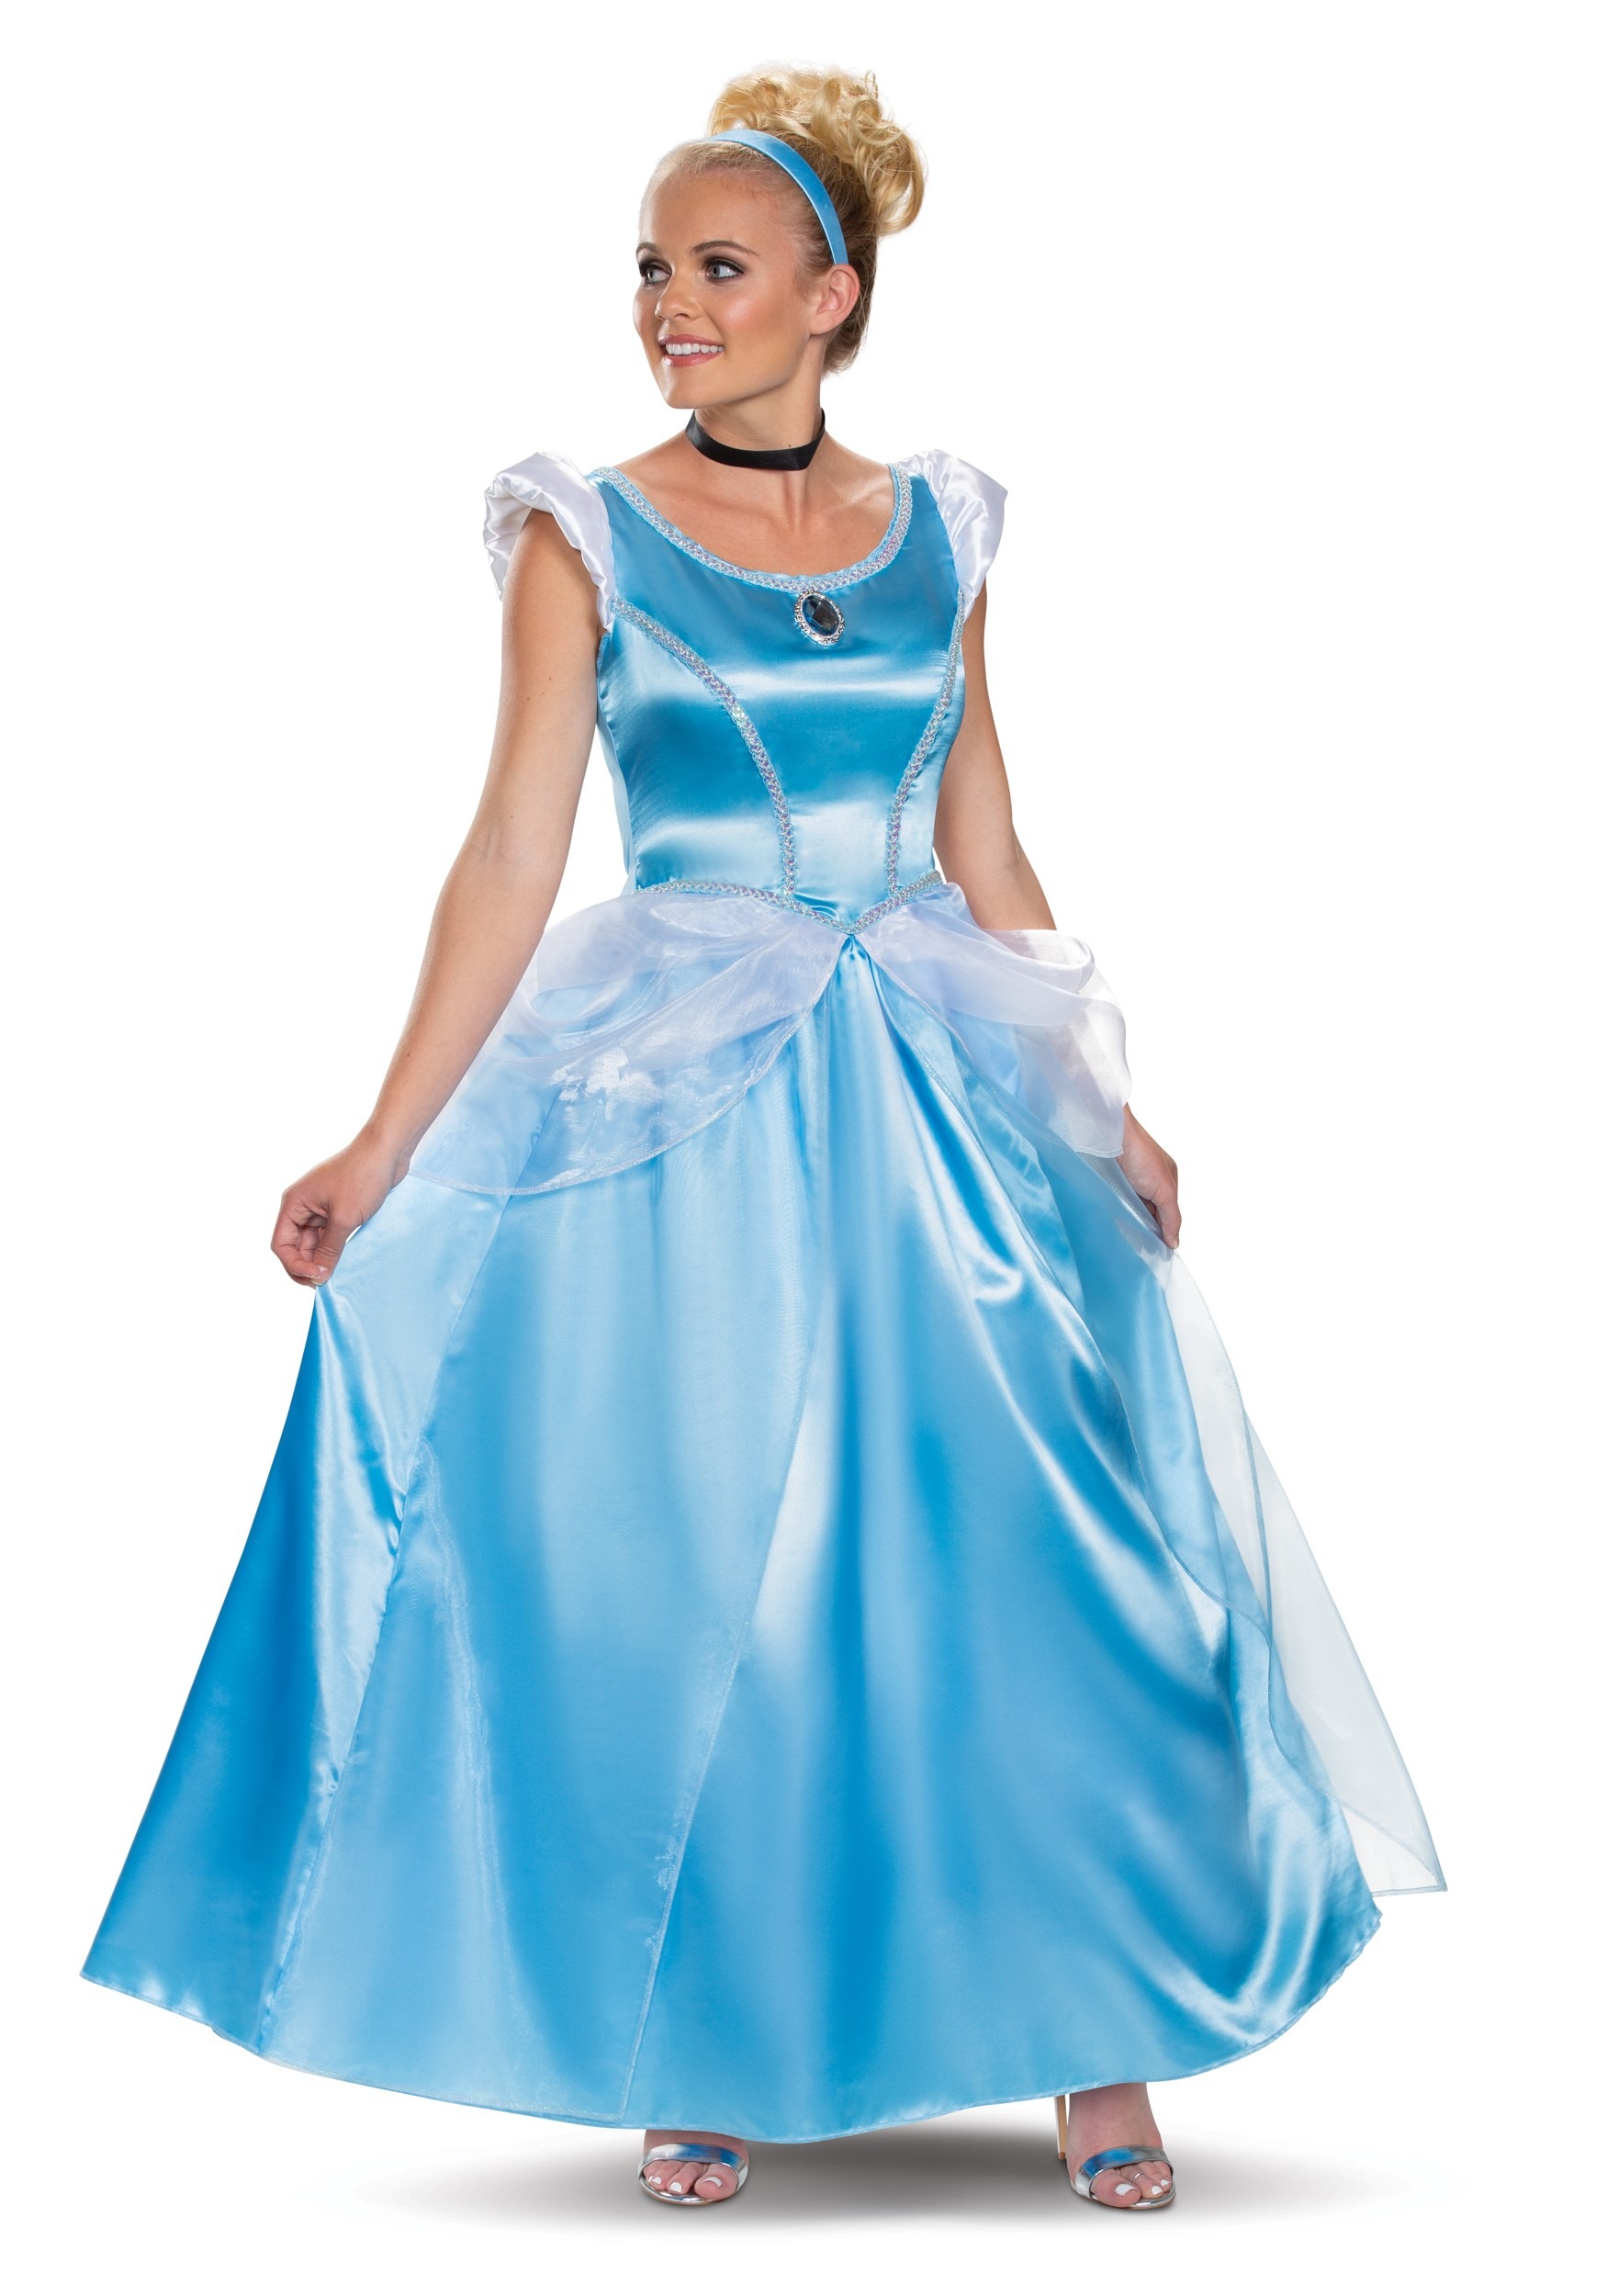 Photos - Fancy Dress Deluxe Disguise  Cinderella Costume for Adults Black/Blue/White DI1 